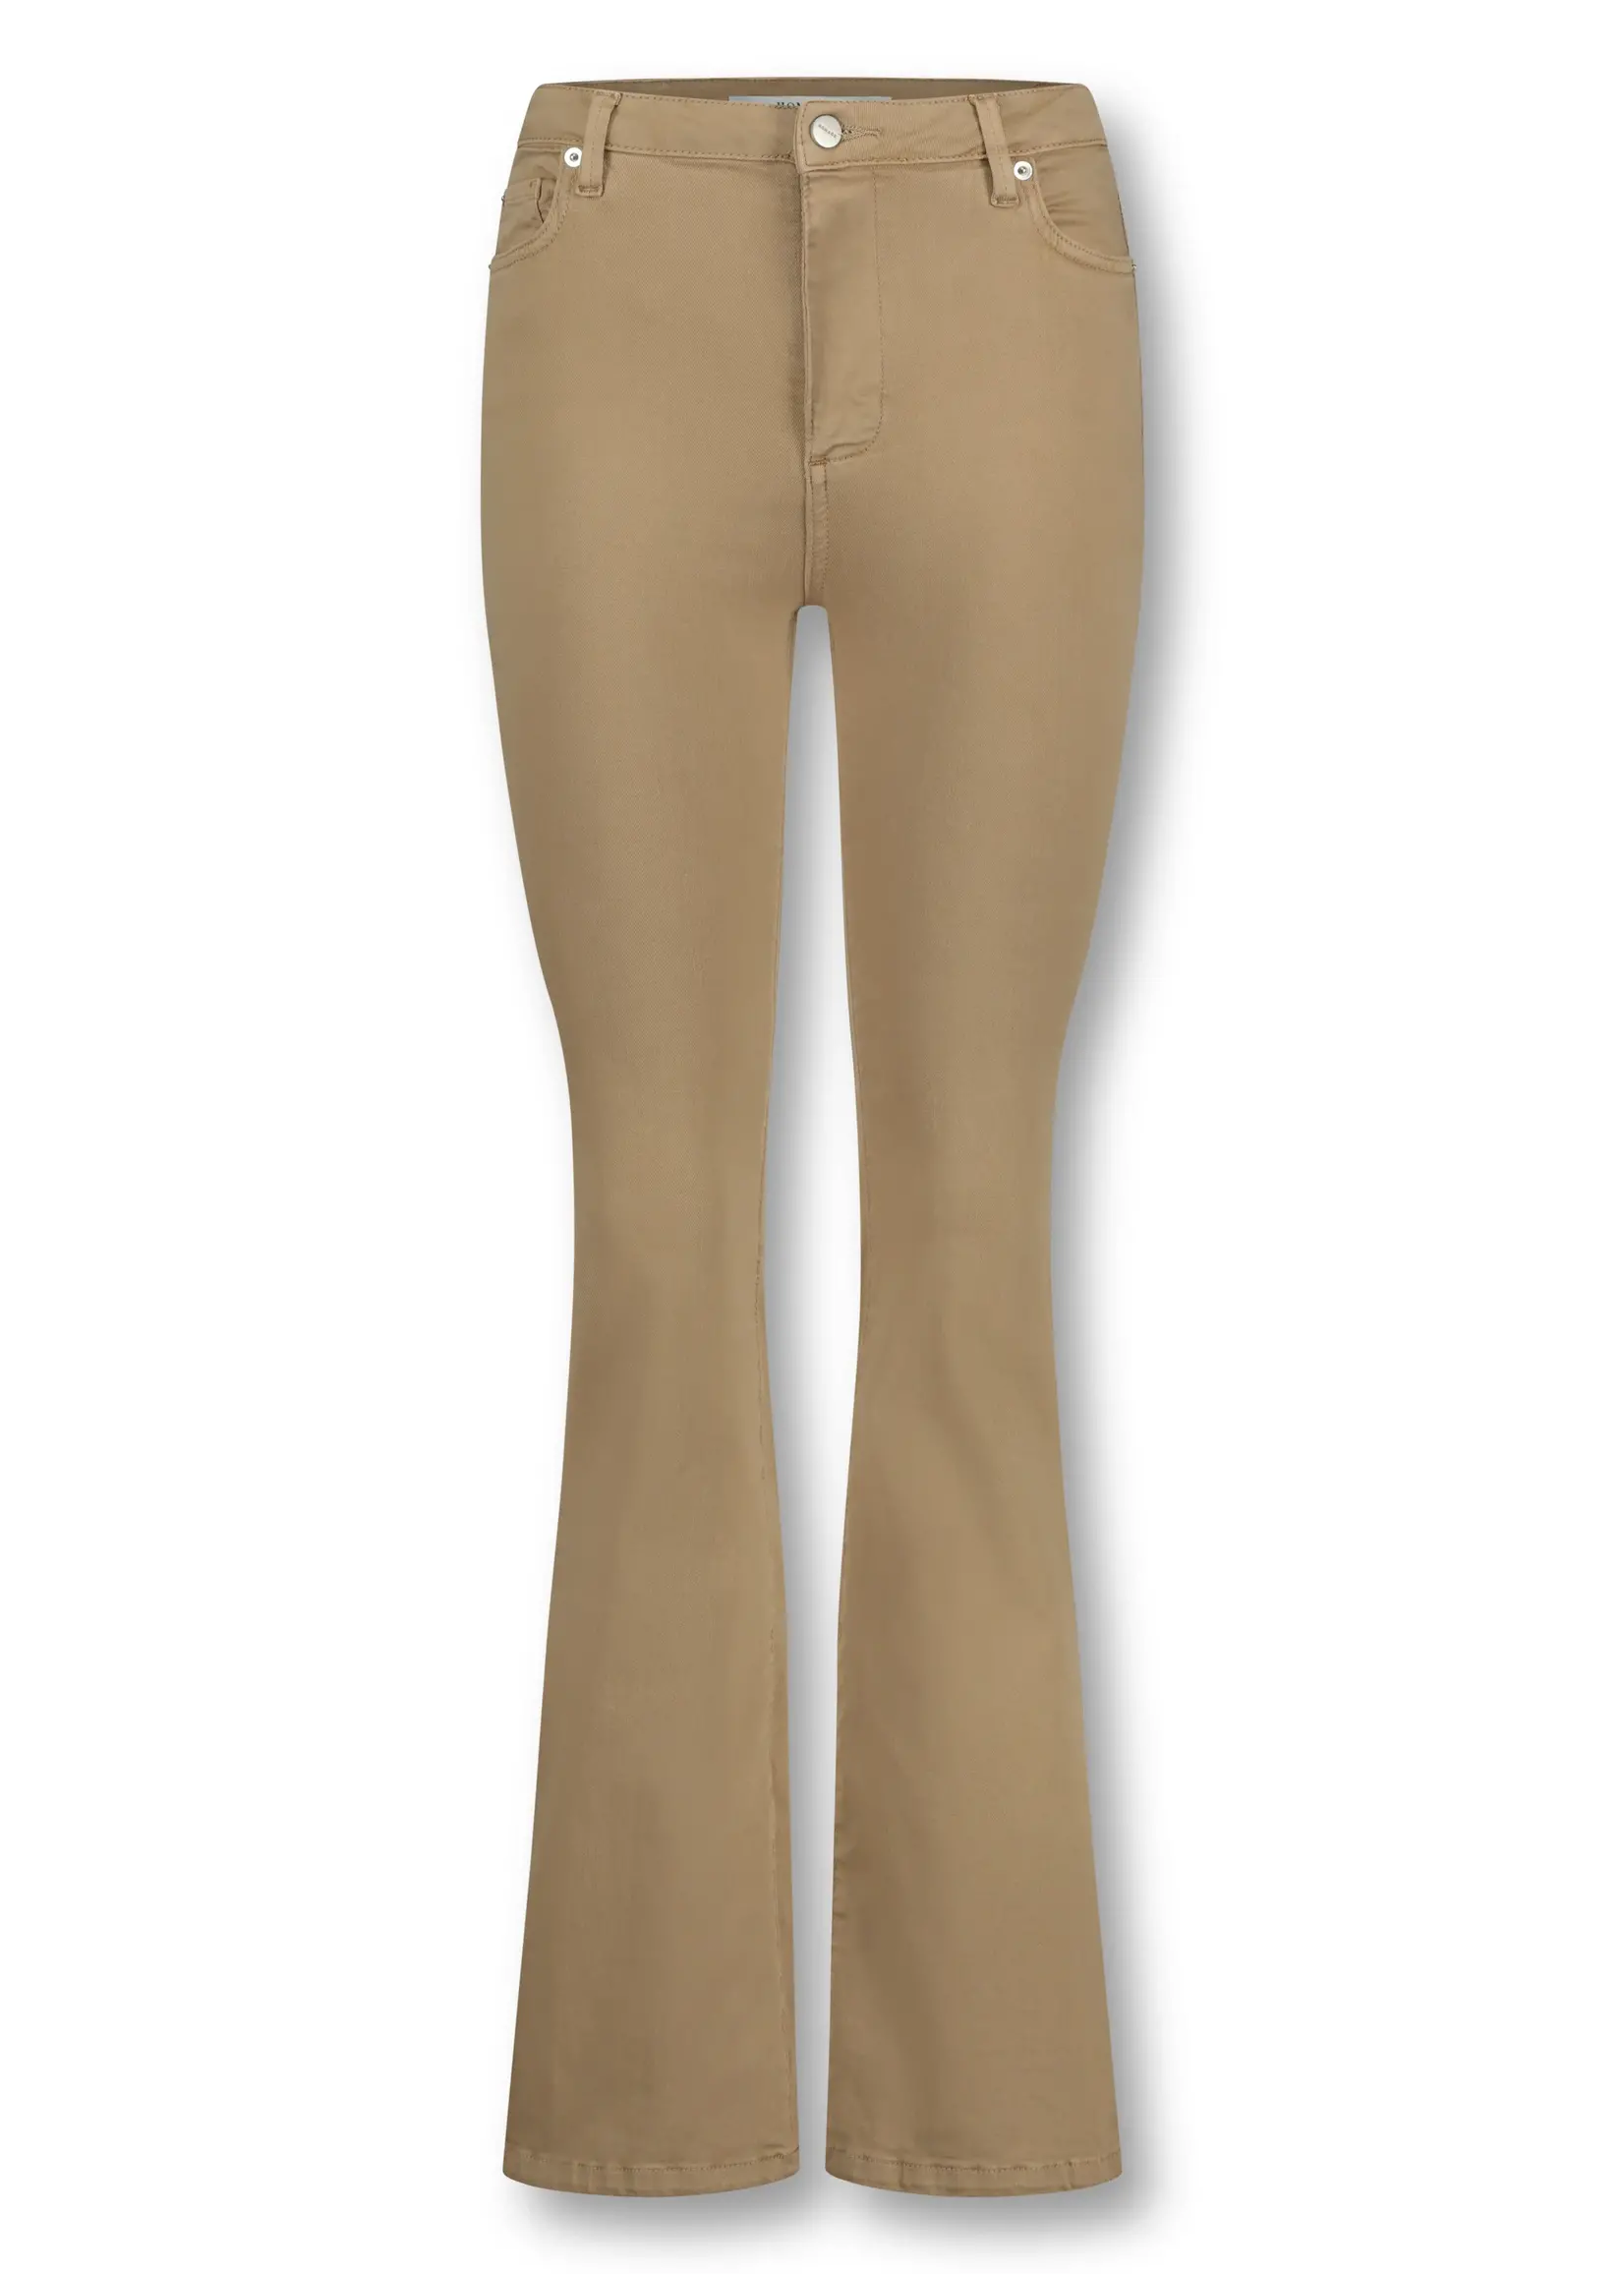 HOMAGE Jane - Colored Flared Jeans - Warm Beige